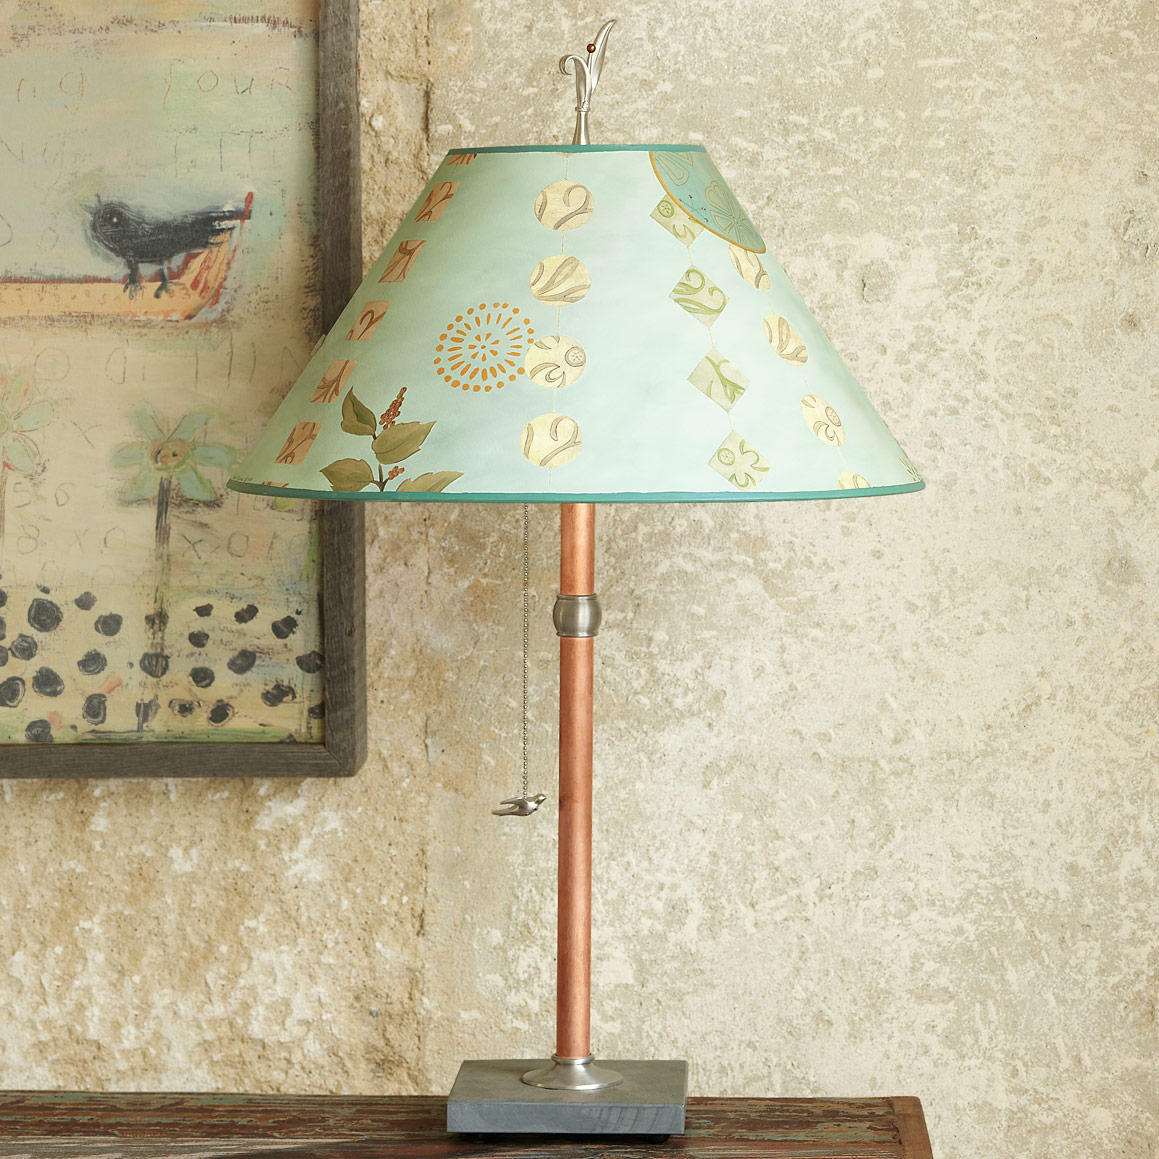 Red Bird Table Lamp